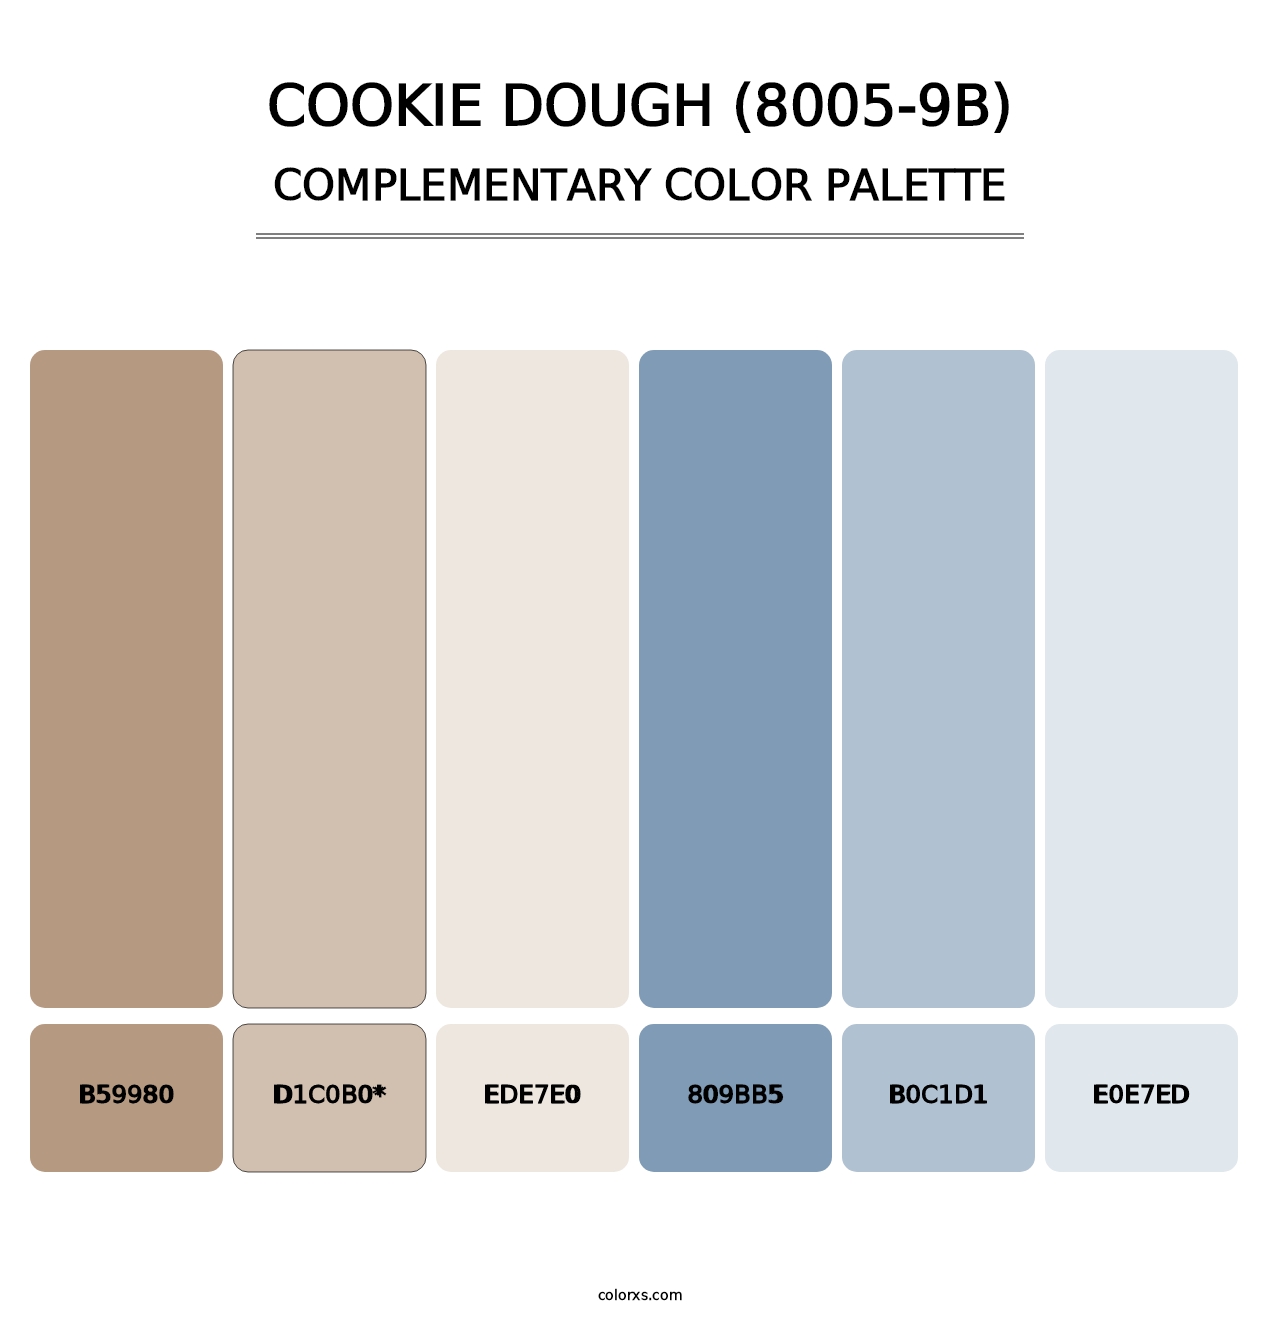 Cookie Dough (8005-9B) - Complementary Color Palette